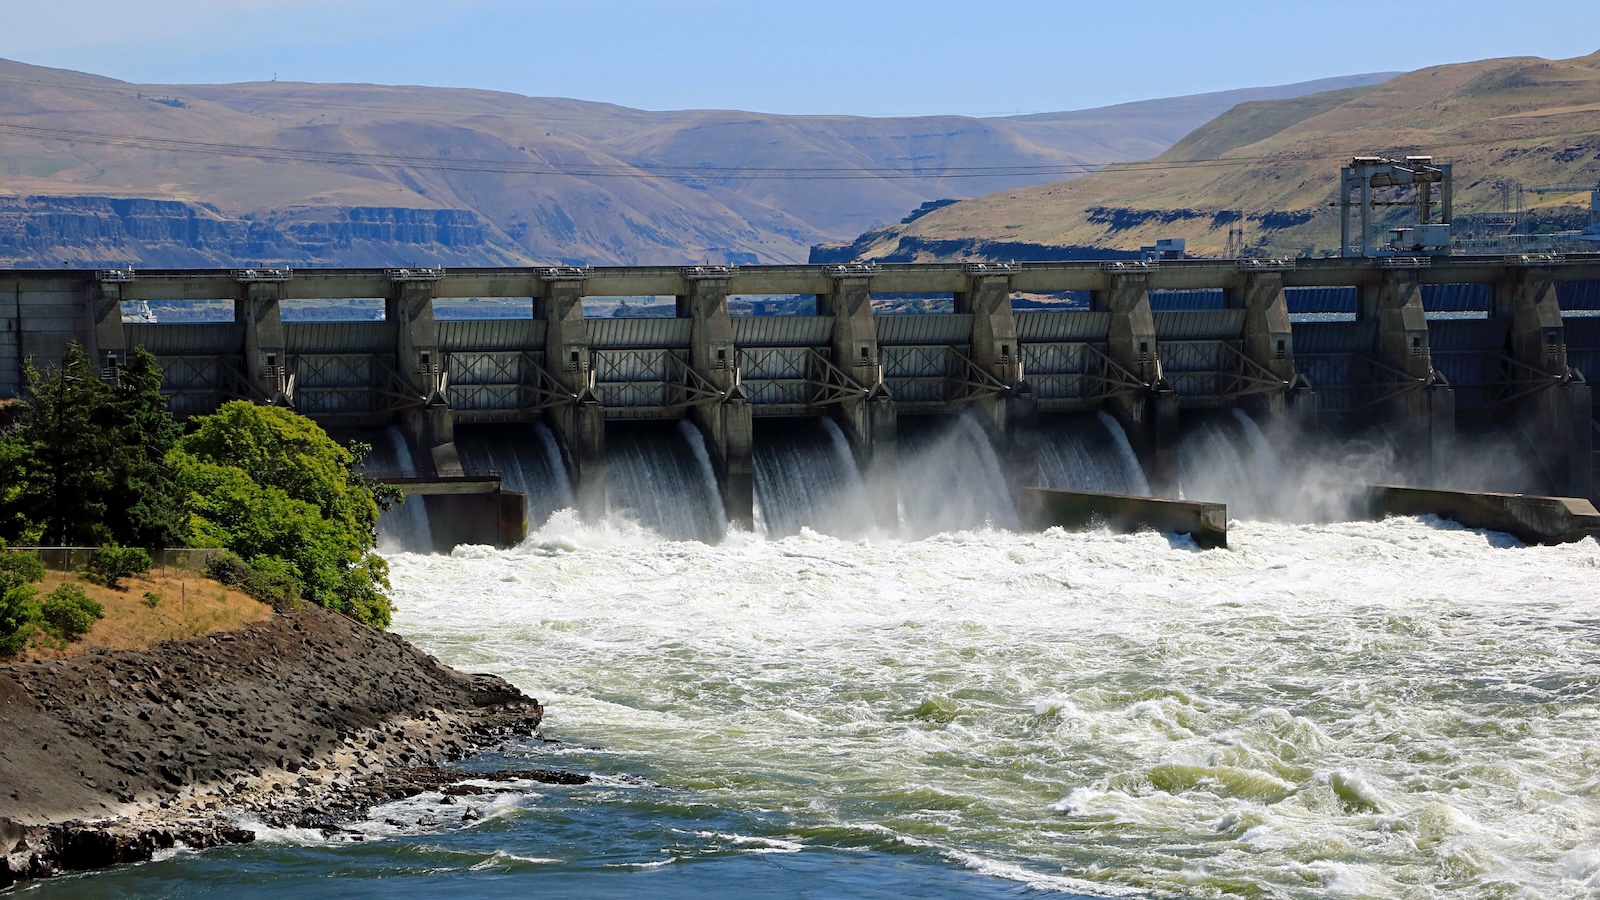 Water pours from the Dalles Dam on the Columbia River in Washington.